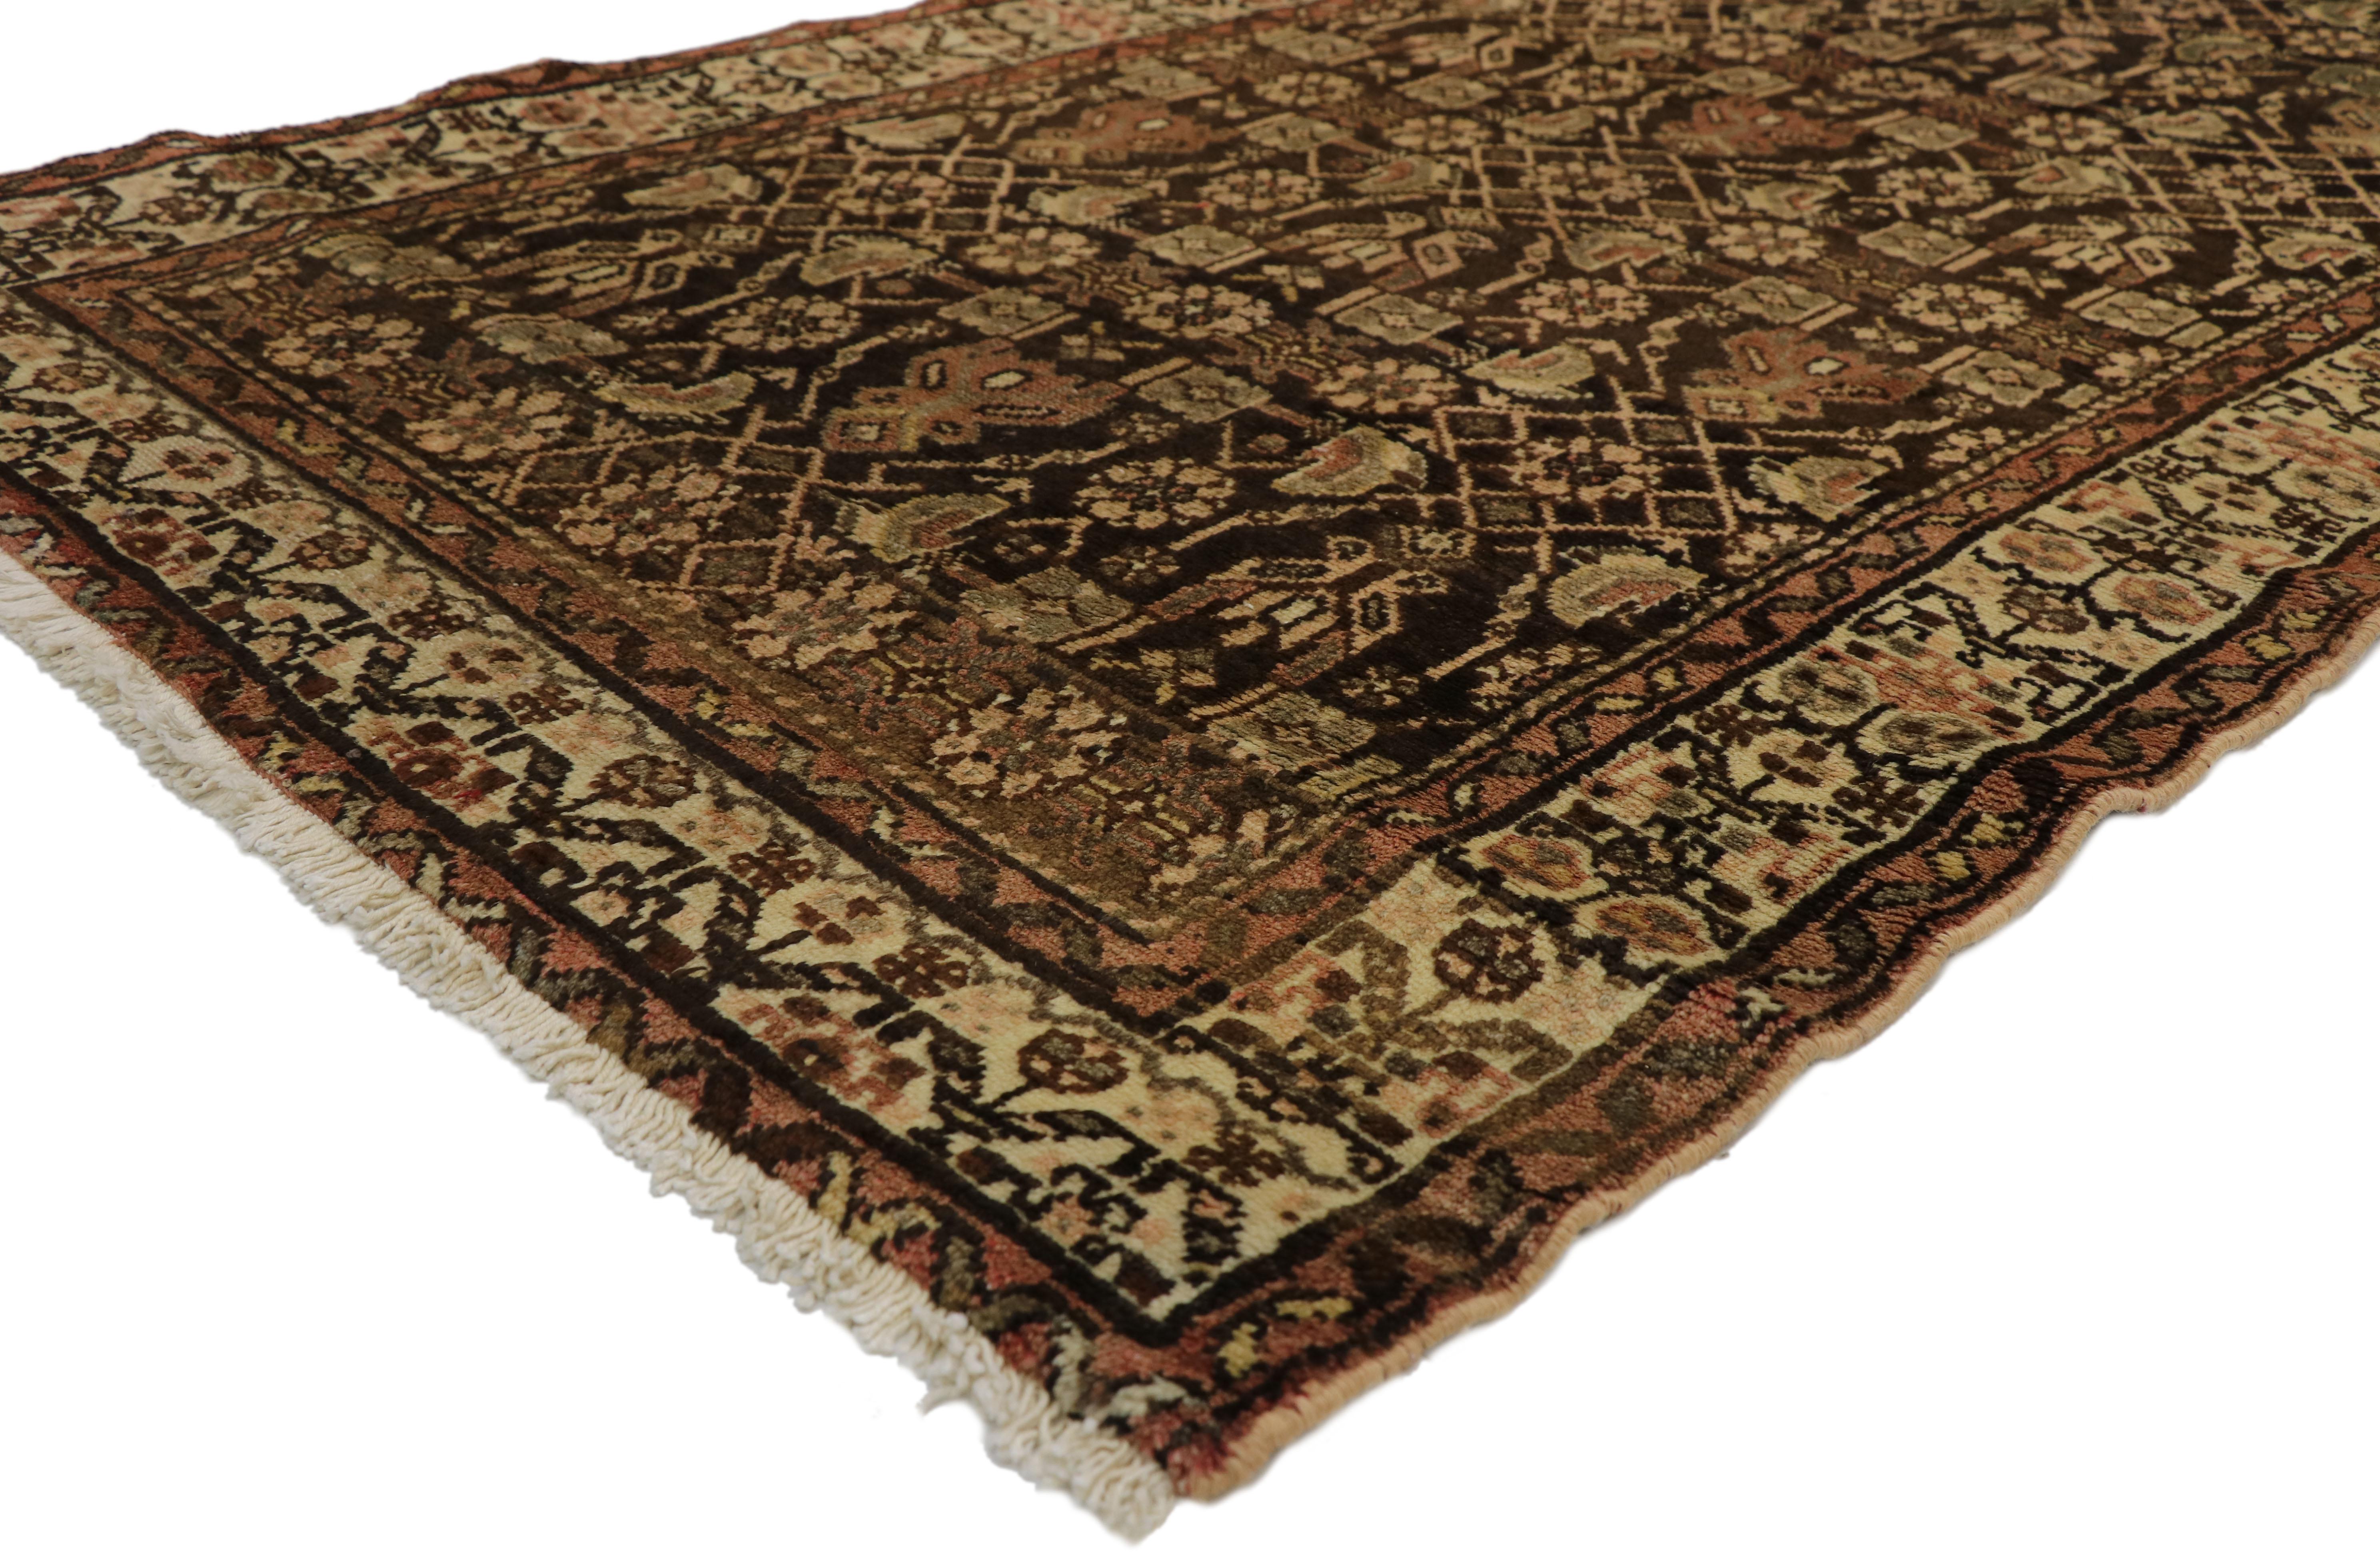 76558 Antique Brown Persian Malayer Rug Runner, 03'02 x 13'00. Long, narrow hand-knotted wool rugs, Antique Persian Malayer rug runners hail from Malayer, Iran, revered for their age, intricate designs, and unparalleled craftsmanship. These historic